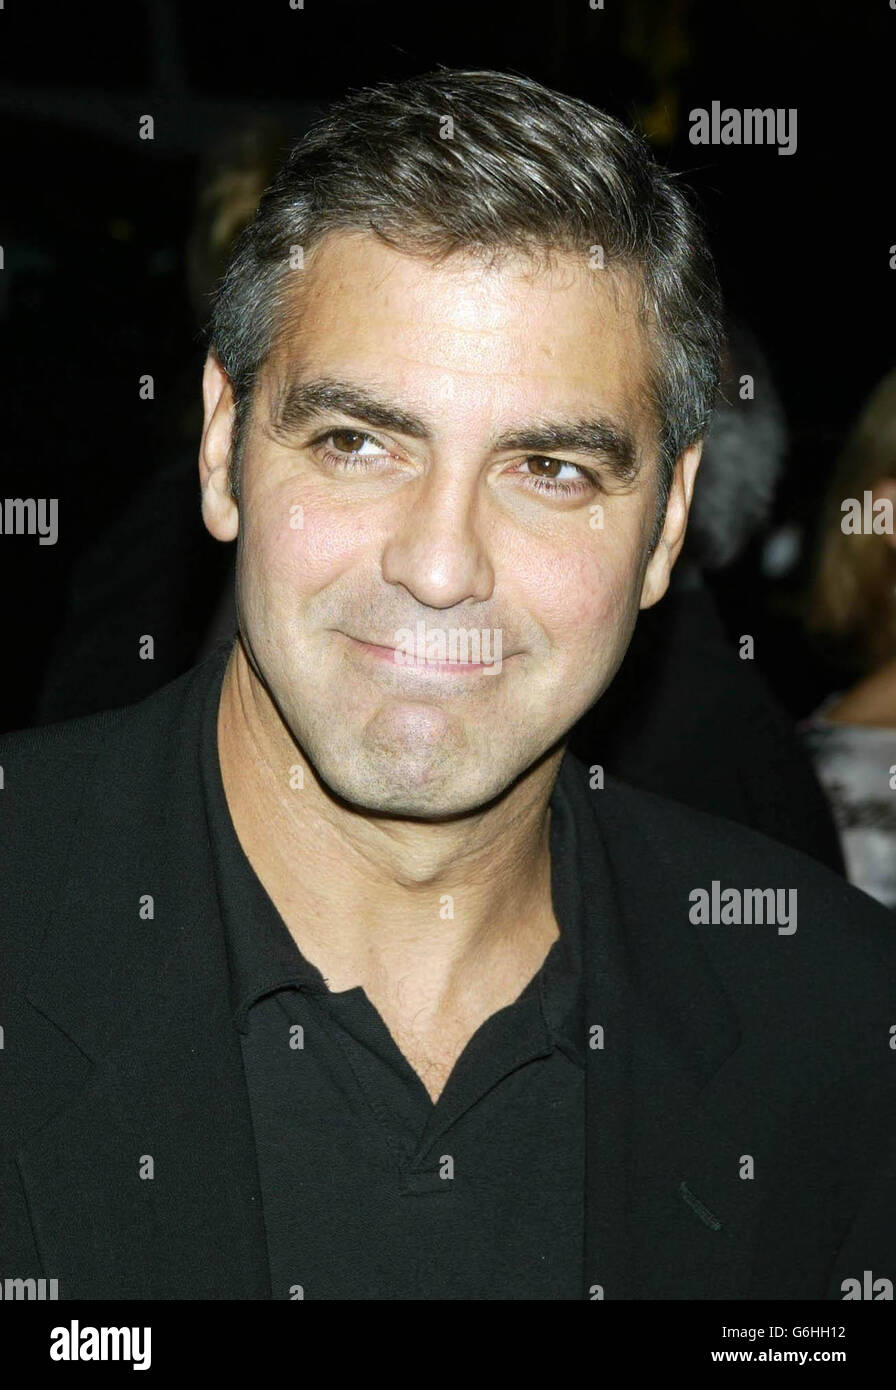 Actor George Clooney arrives for the world premiere of his new film Intolerable Cruelty at the Academy of Motion Picture Arts and Sciences in Beverly Hills, Los Angeles. 15/10/03: Actor George Clooney who is coming to Scotland to film a Hollywood blockbuster. Two big names are to be unveiled in Glasgow tomorrow as the stars of an action-packed thriller, it is understood. Clooney has already visited Bathgate and Broxburn, in West Lothian, searching for locations for the film, believed to be a psychological drama about a Vietnam veteran who is wrongly accused of a crime. Stock Photo